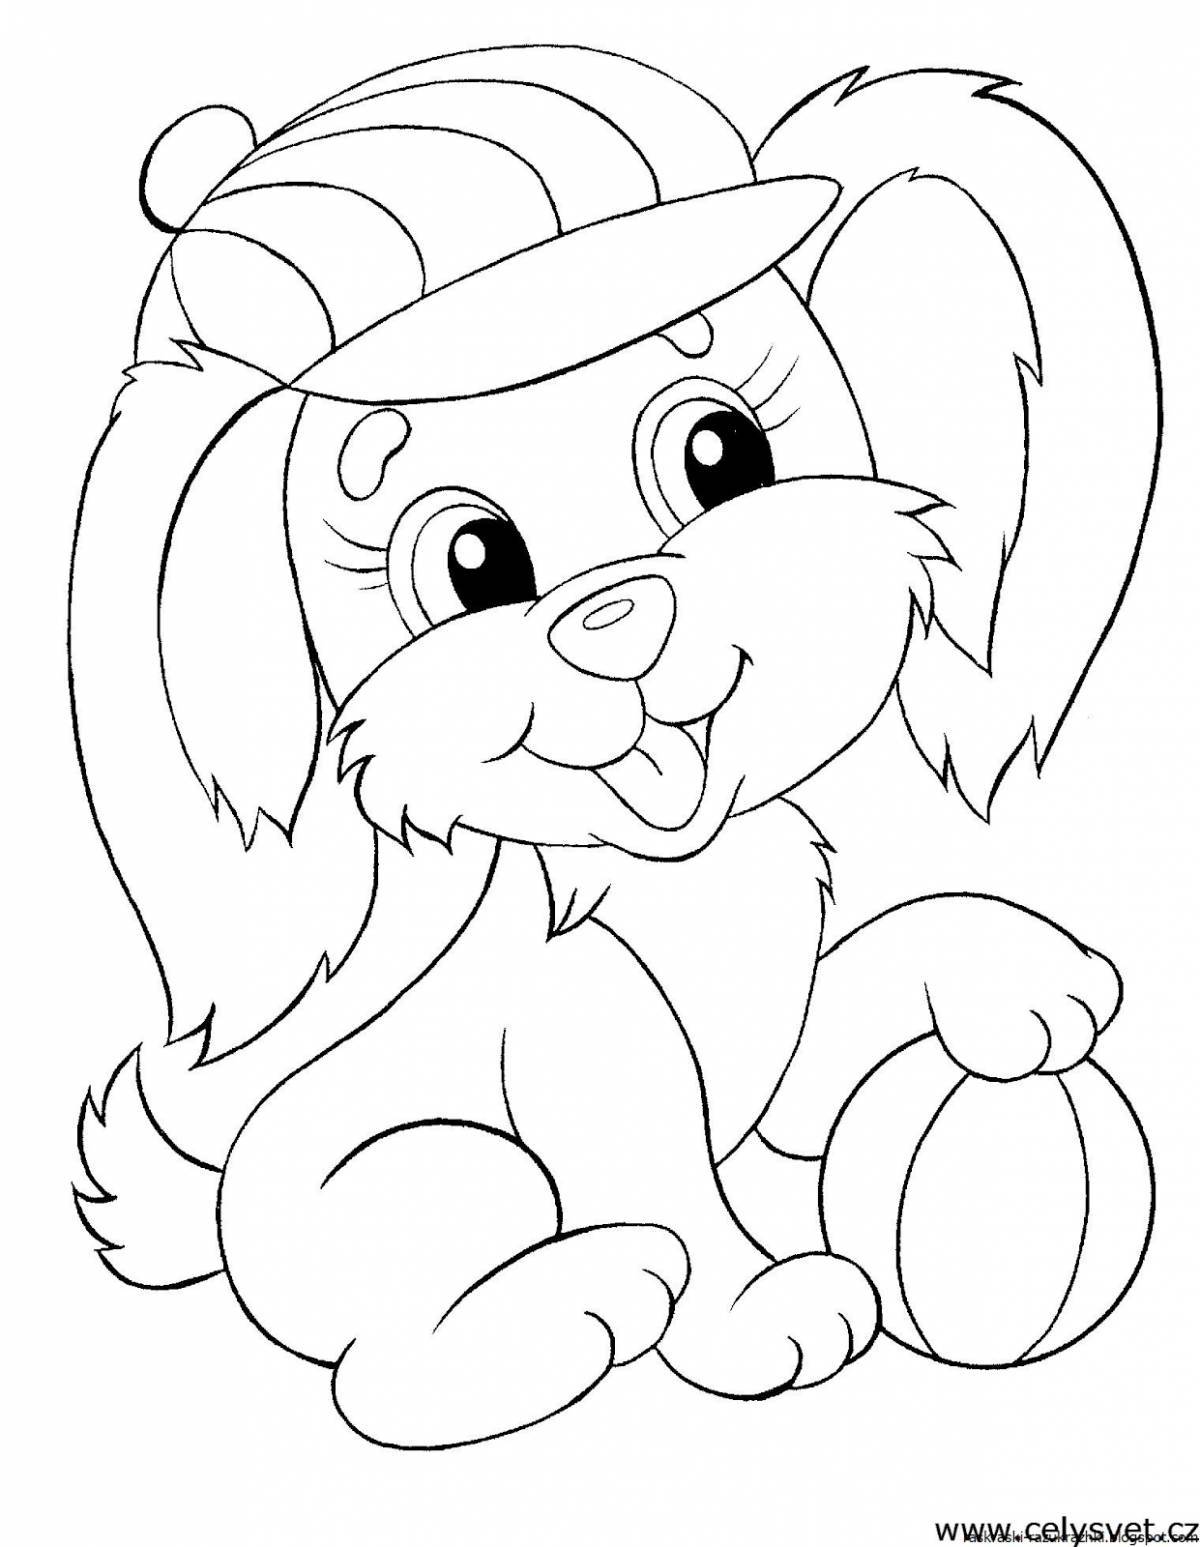 Royal animal coloring pages